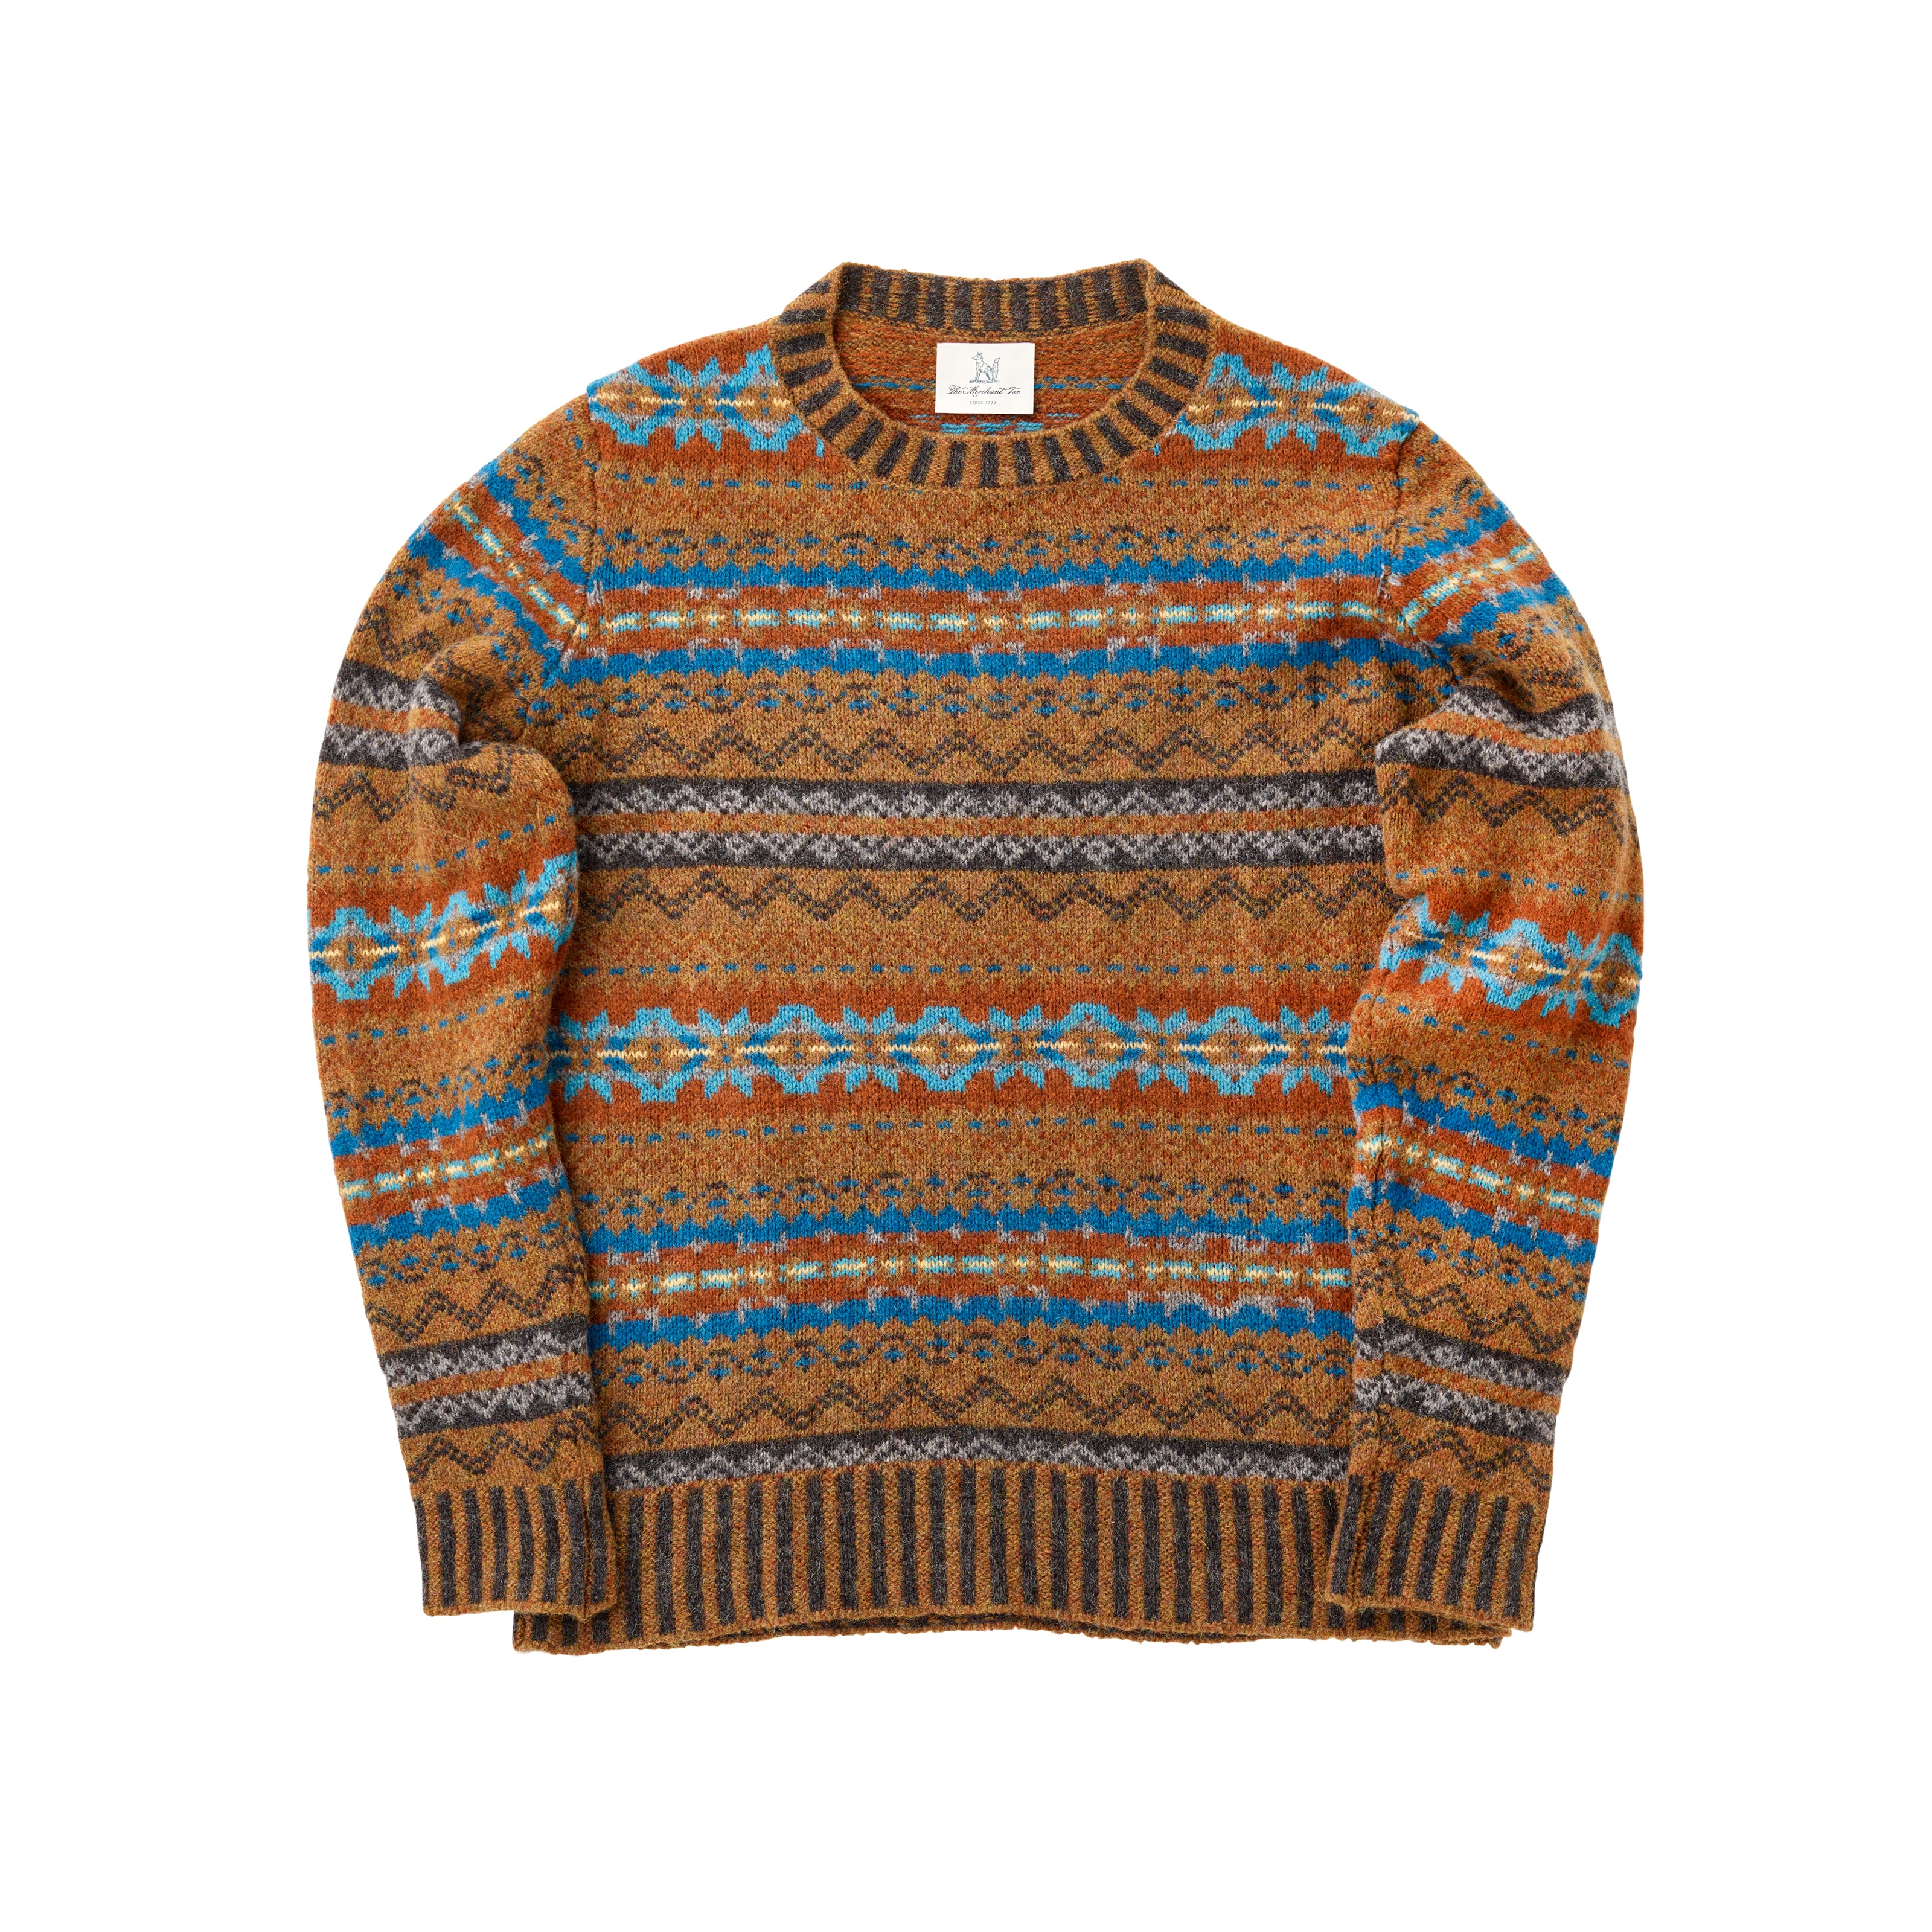 The Melrose Sweater in Scots Pine